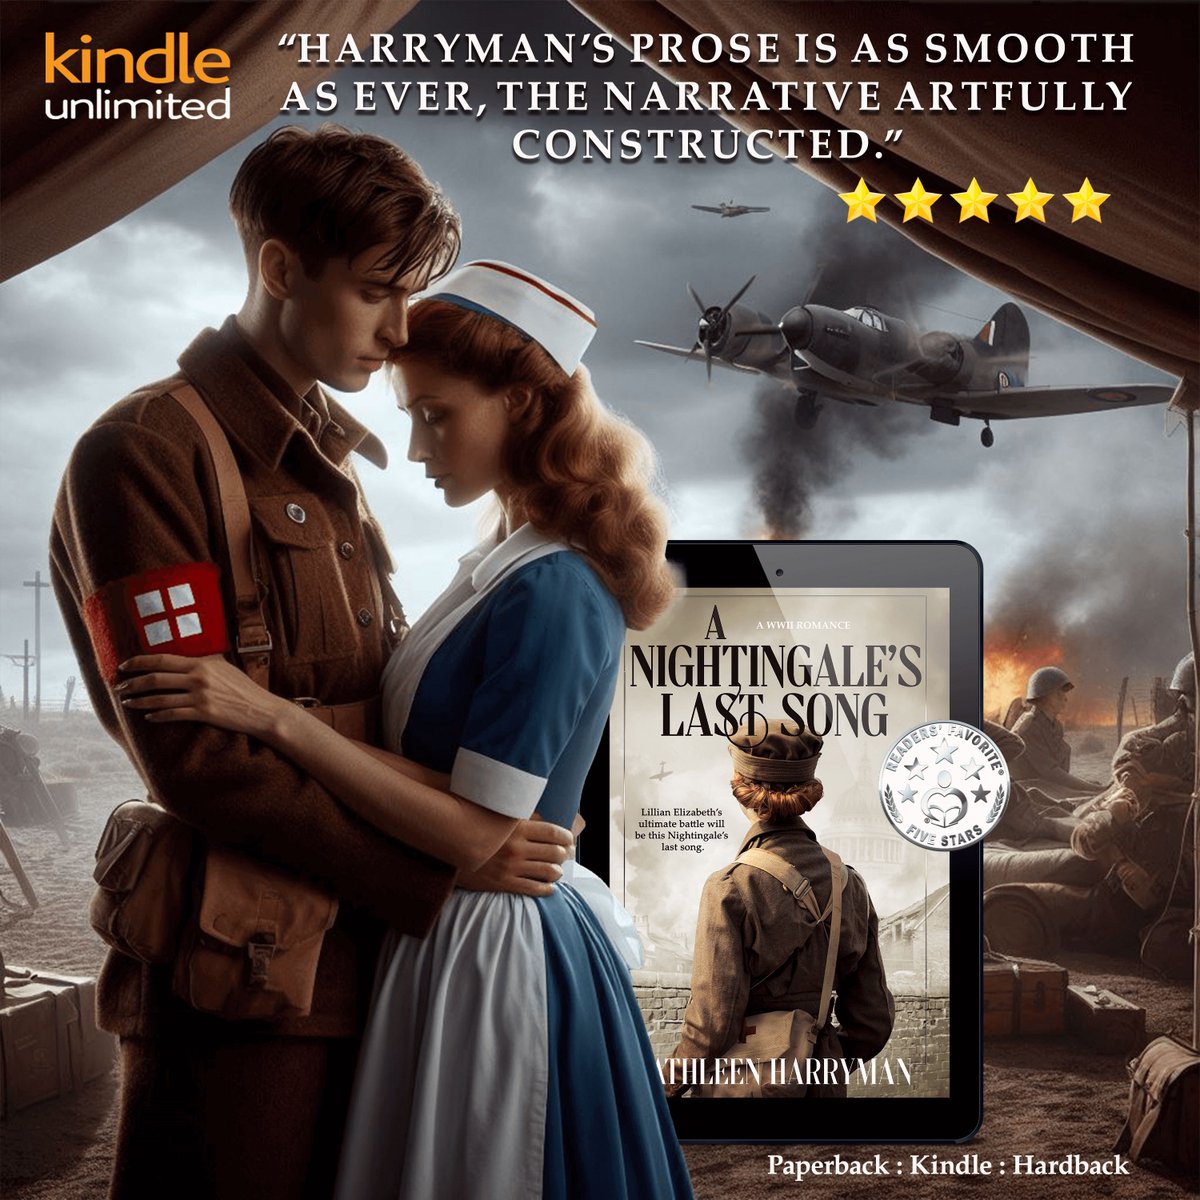 #BookReview 'Lilly's struggle with love, torn between Major Joseph Lawrence and Sergeant Alick McNavis, offers an enthralling romantic tale that’s sure to sweep you off your feet.' #KU #Kindle #Paperback #Hardback buff.ly/3QgrEbV #HistoricalFiction #HistFic #IARTG #WW2